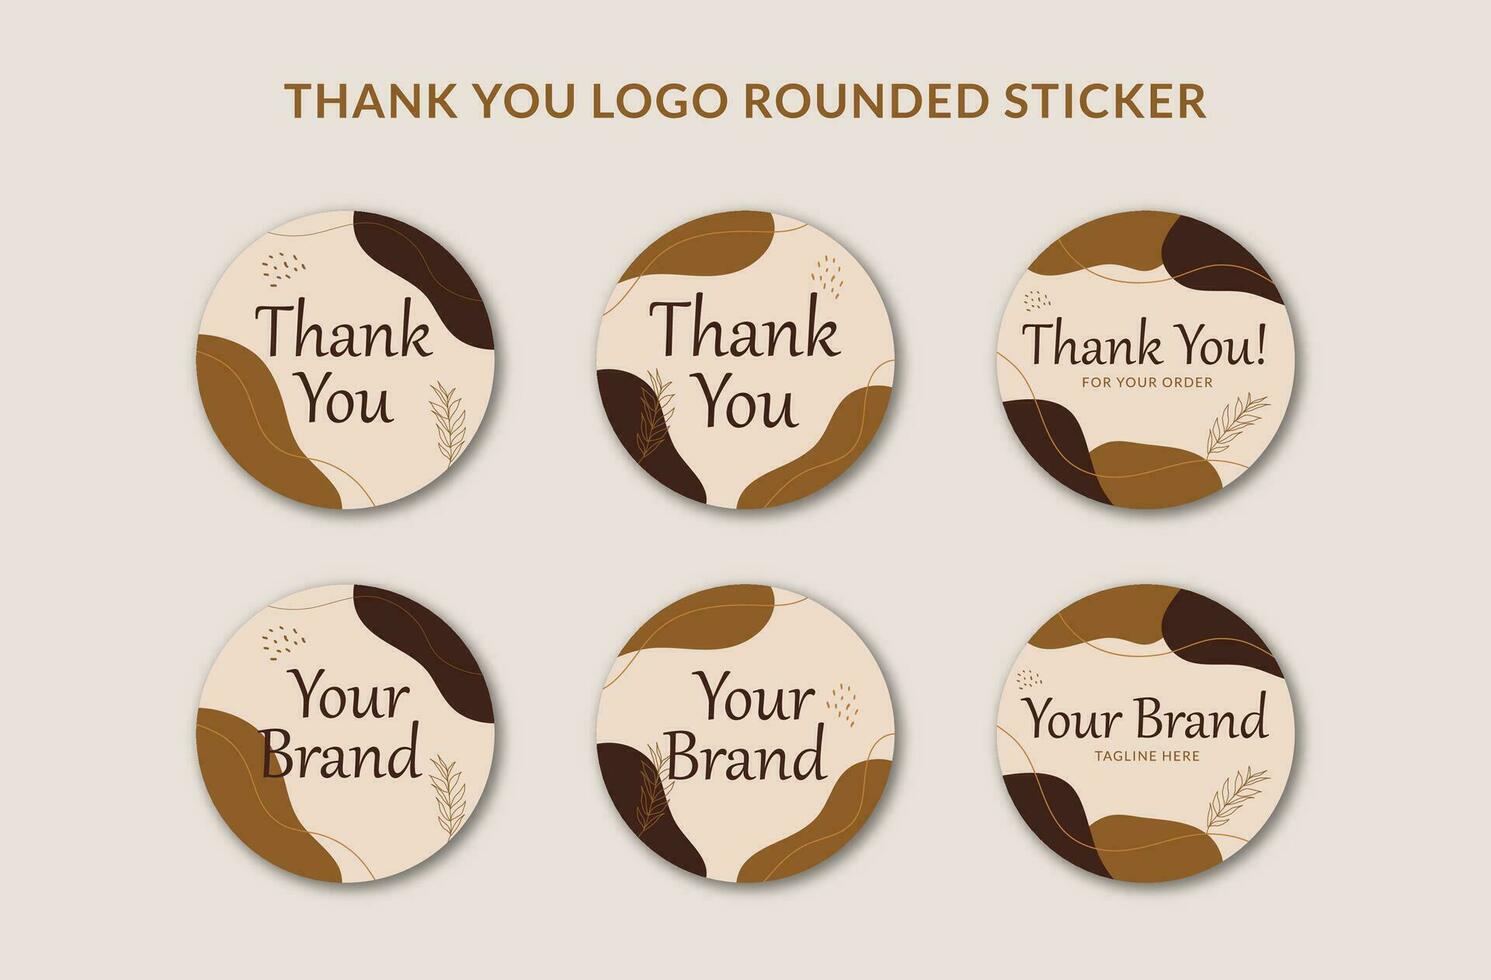 Printable Thank You Rounded Badge Sticker and Branding Logo Sticker Decorated with Brown Organic Blob and Botanical Object. Suitable for Small Online Business Bakery, Food Coffee Shop Branding vector